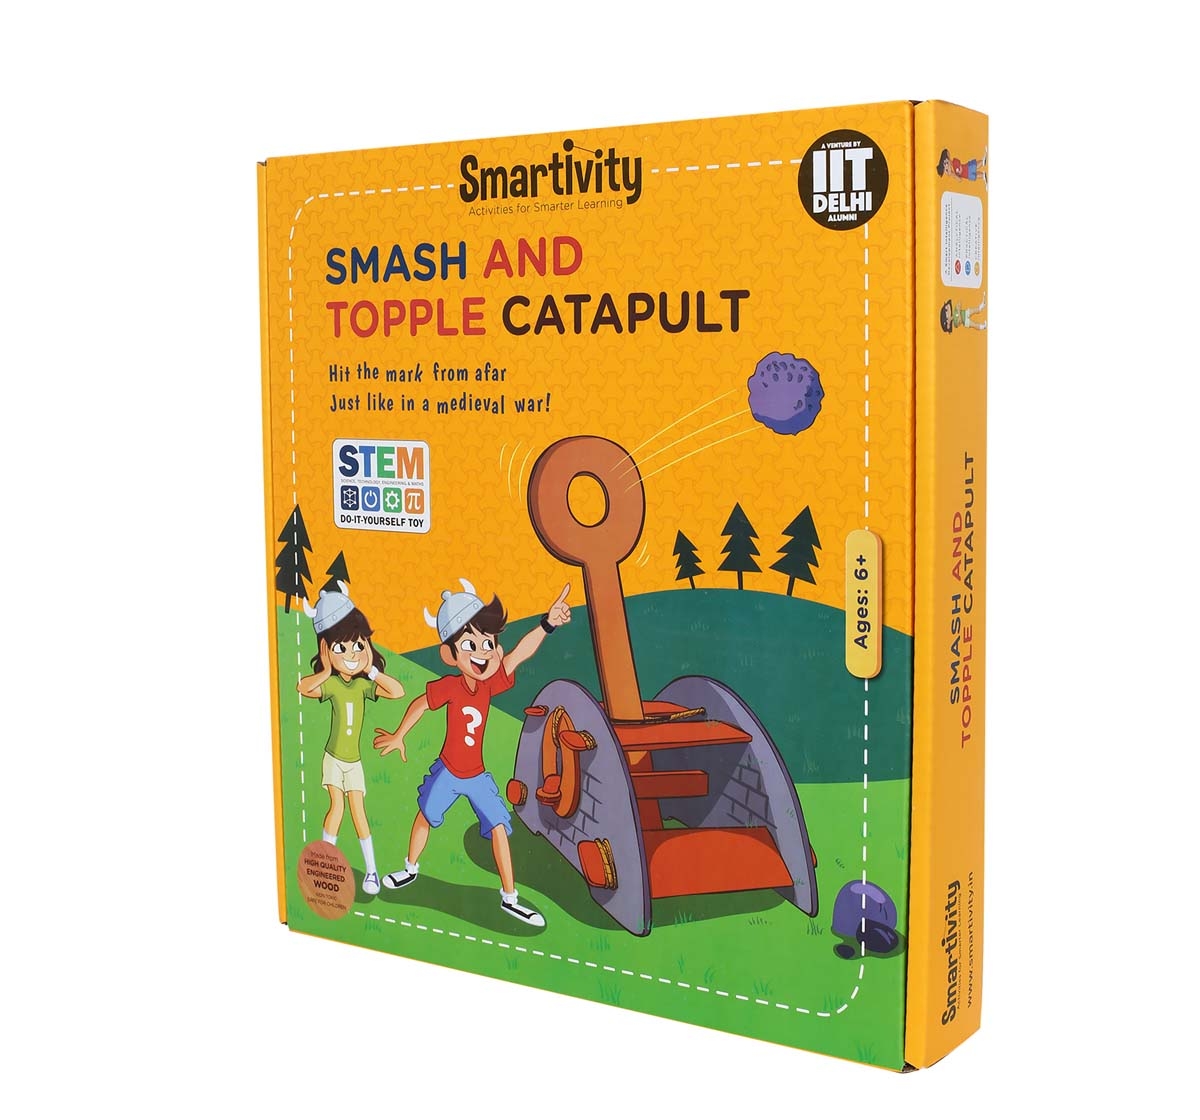 Smartivity | Smartivity Smash And Topple Catapult: Stem, Learning, Educational and Construction Activity Toy STEM for Kids age 6Y+ 